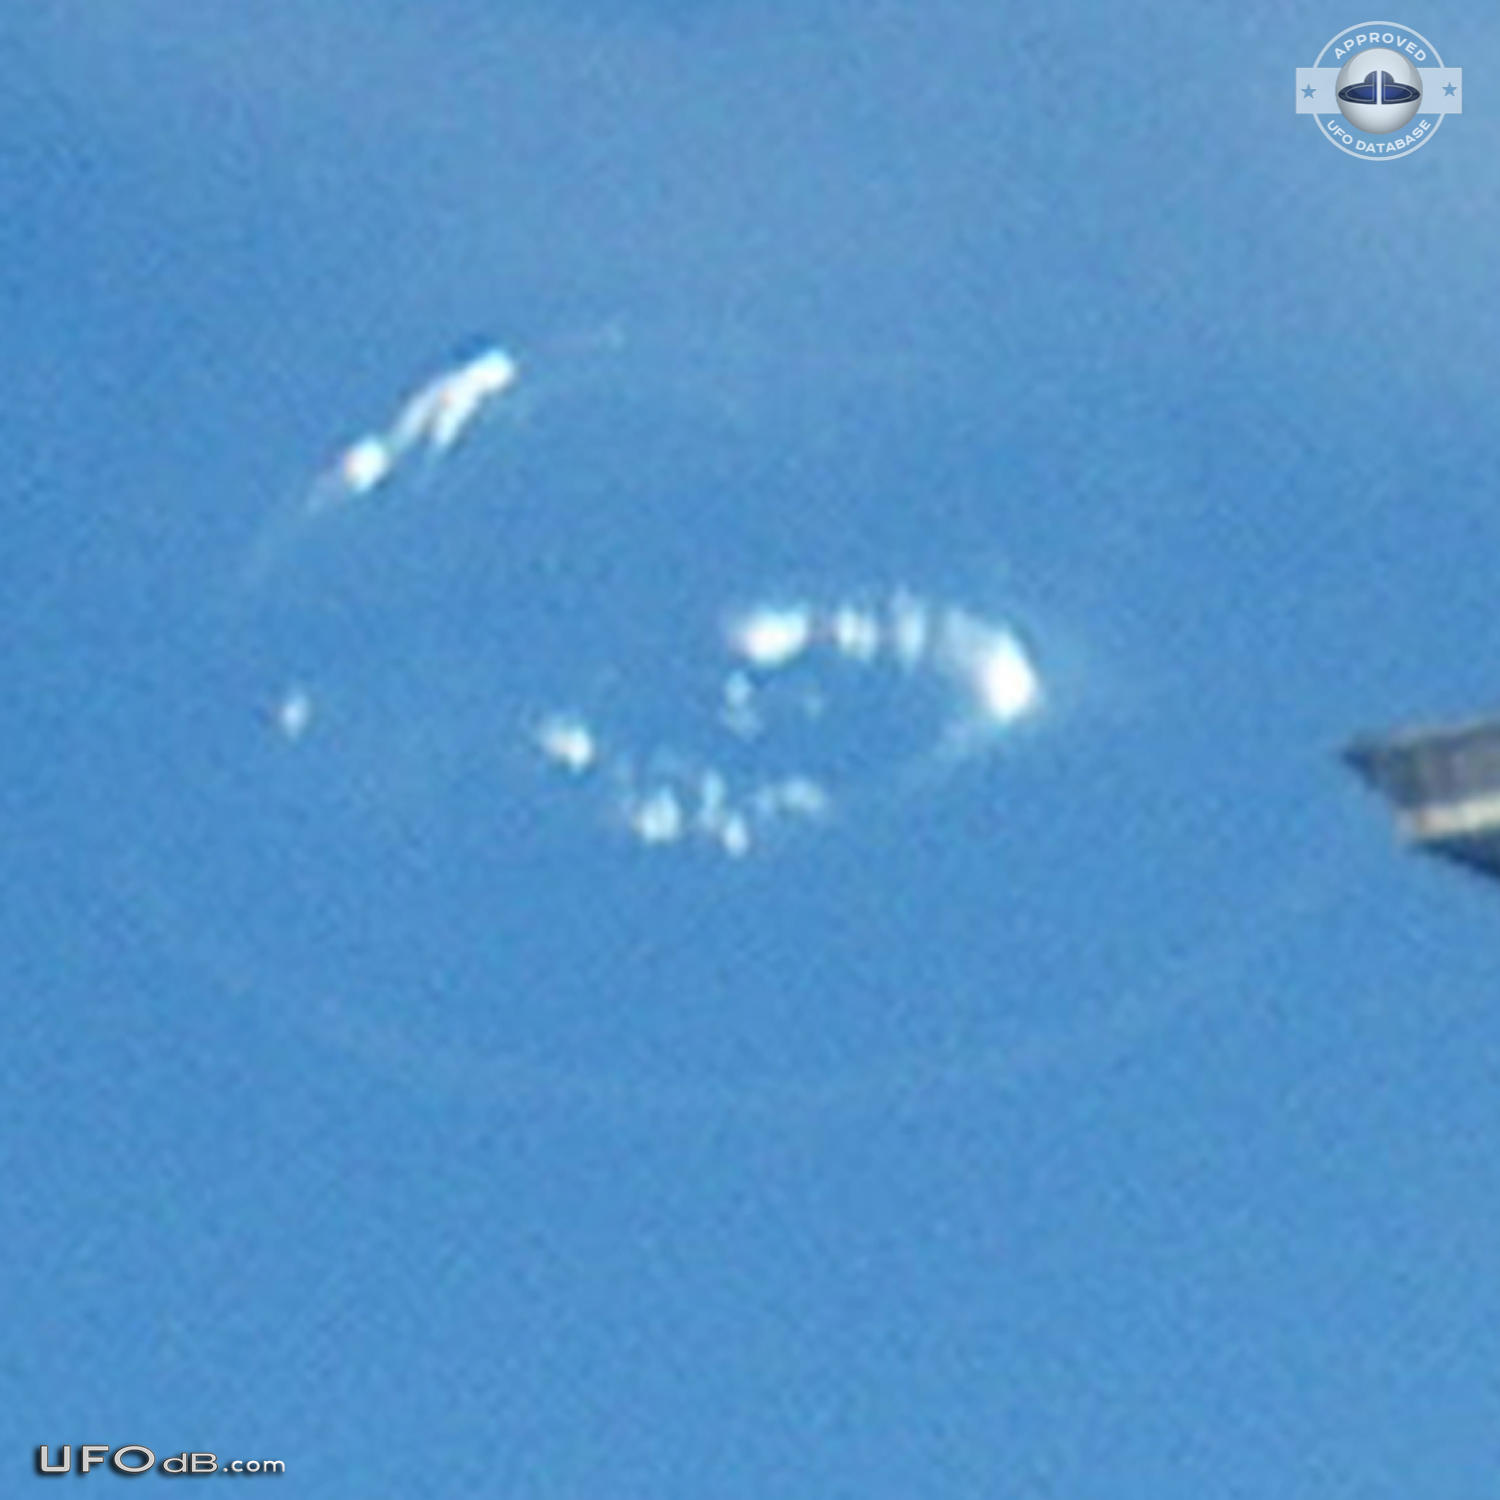 Strange ring UFO with clouds over Buckingham palace London UK 2012 UFO Picture #525-4